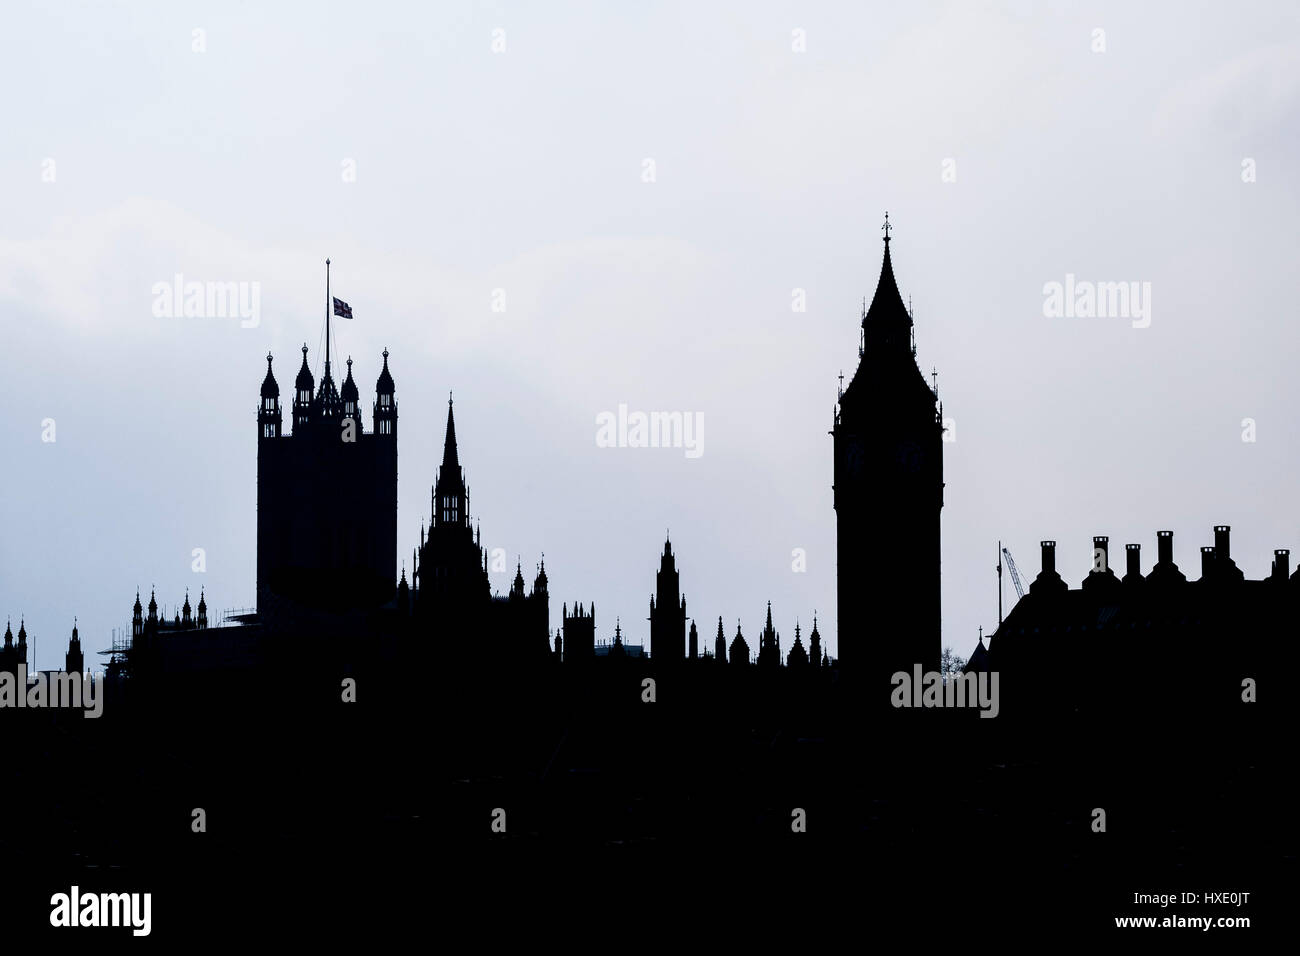 Westminster Parliament Silhouette London Skyline Iconic Big Ben Stock Photo